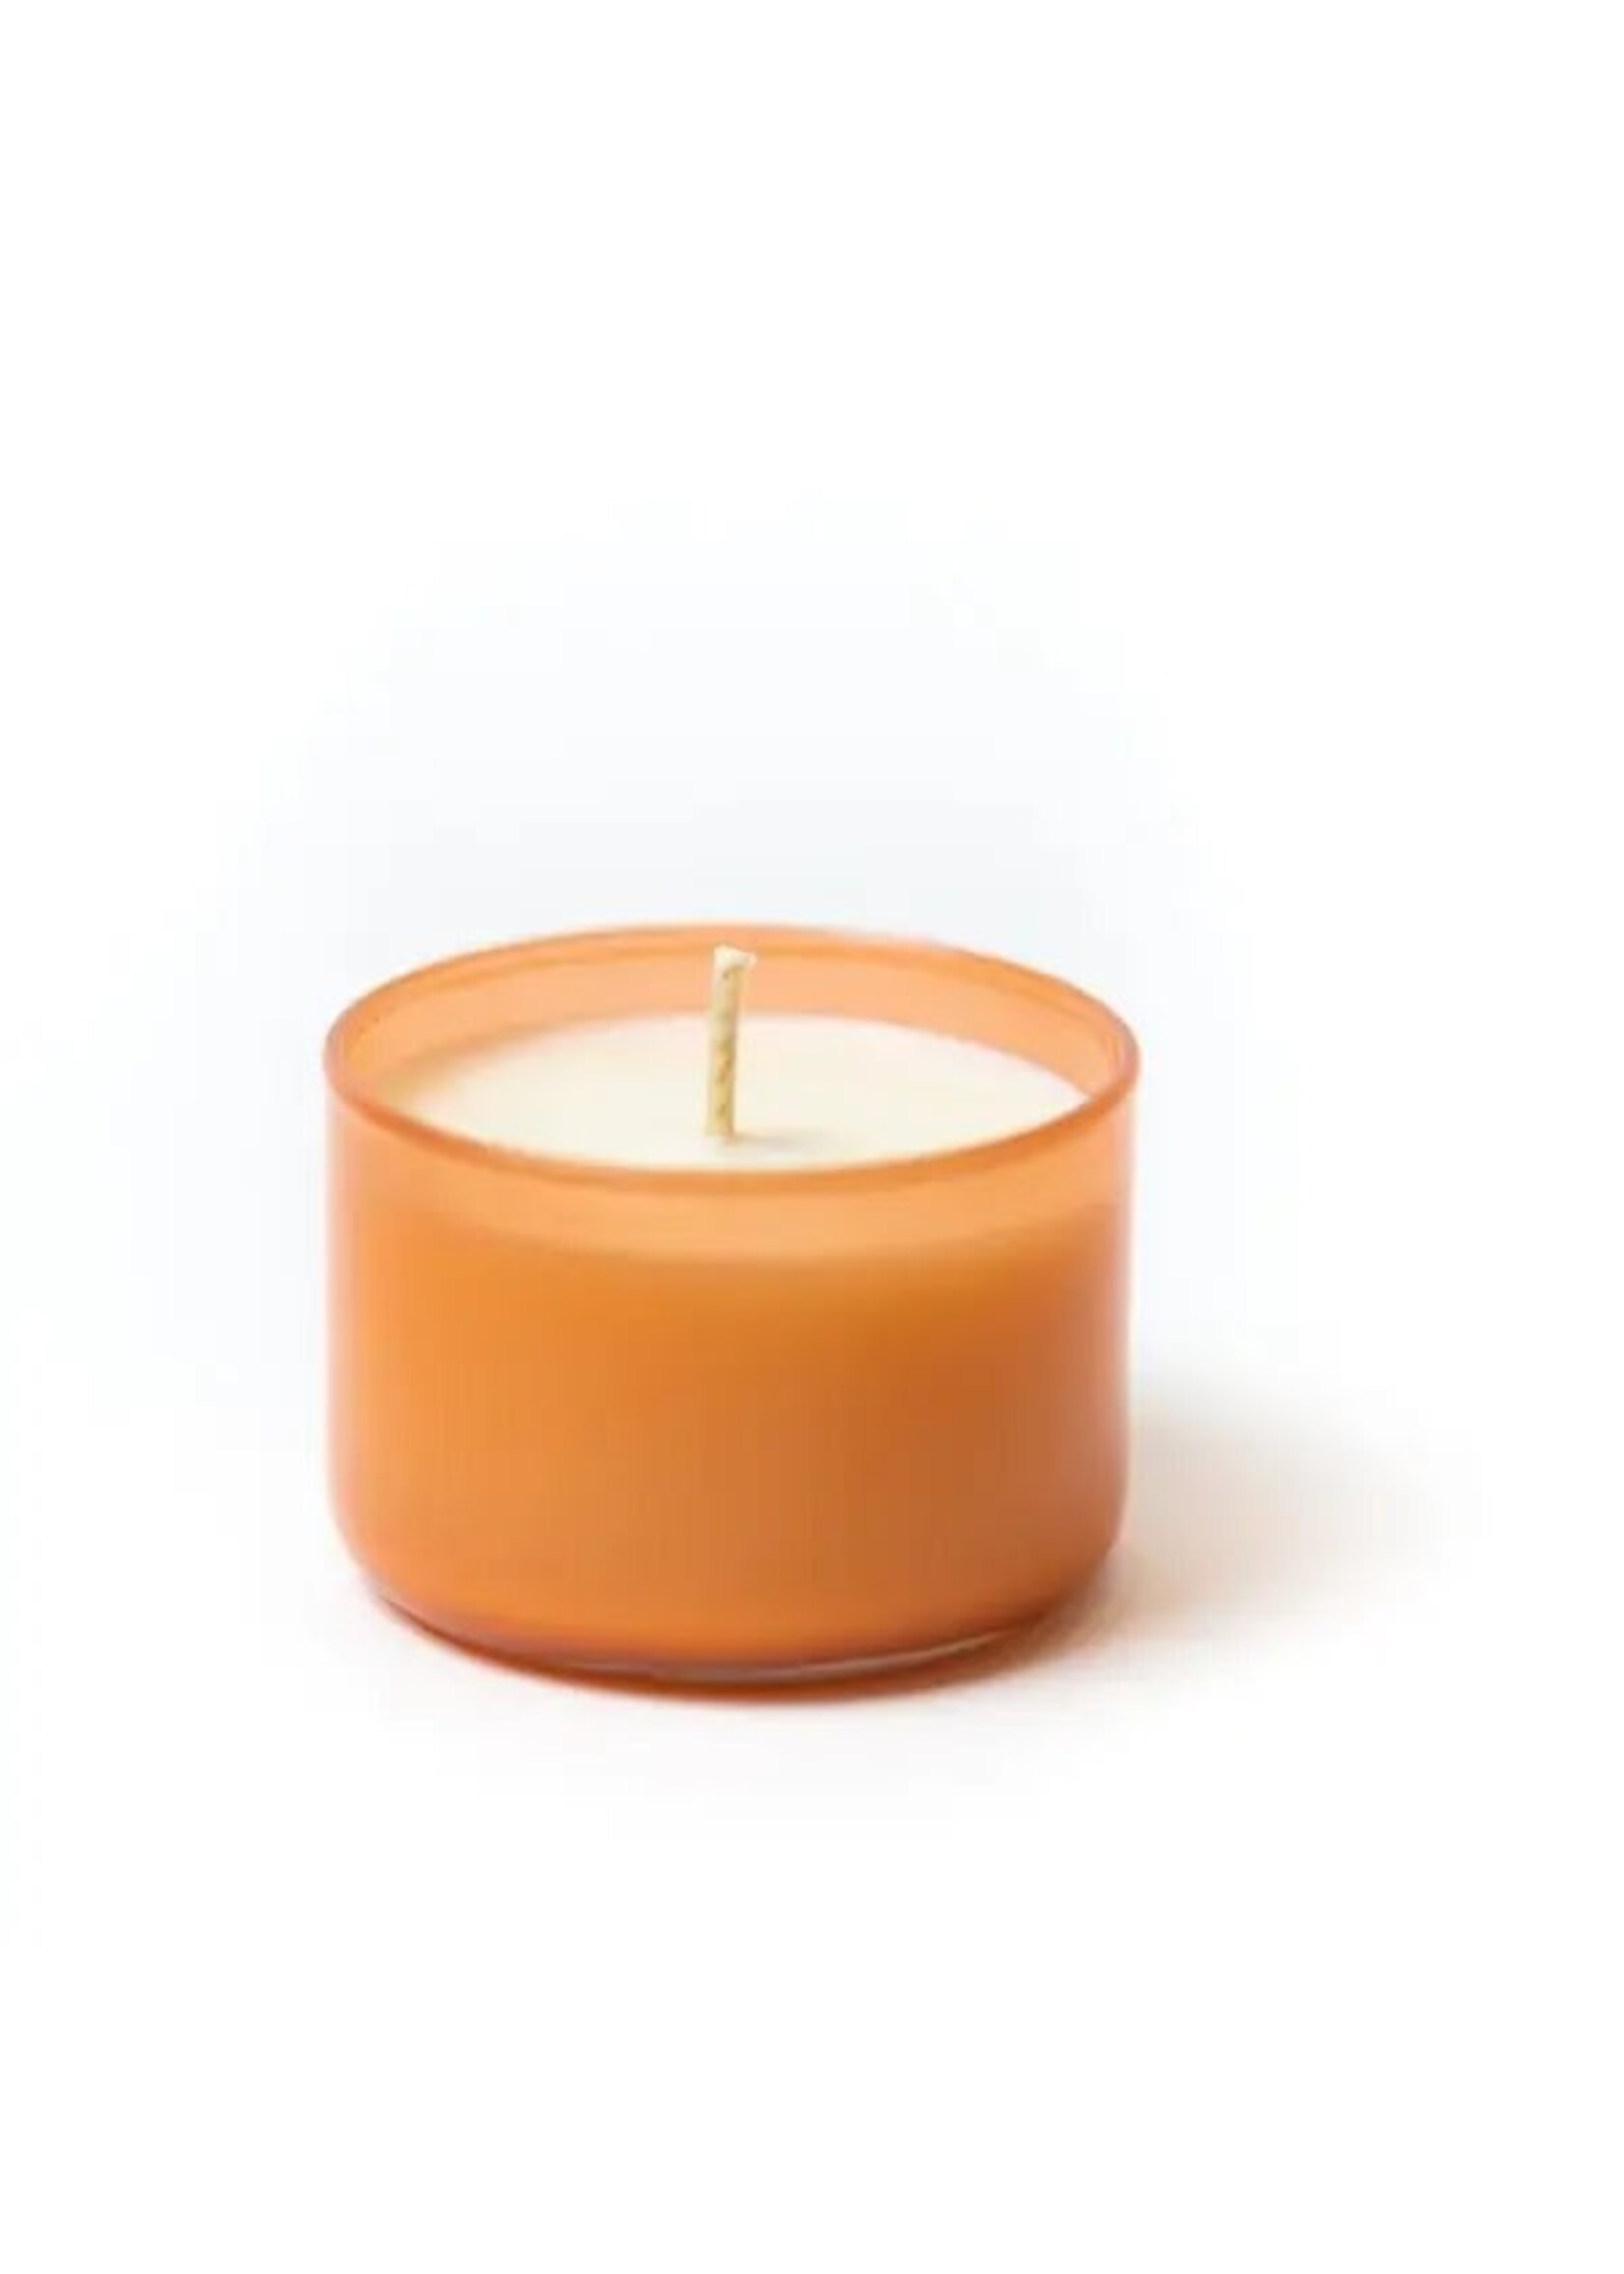 Candle- Cardamom & Clove Soy Candle  4oz glass